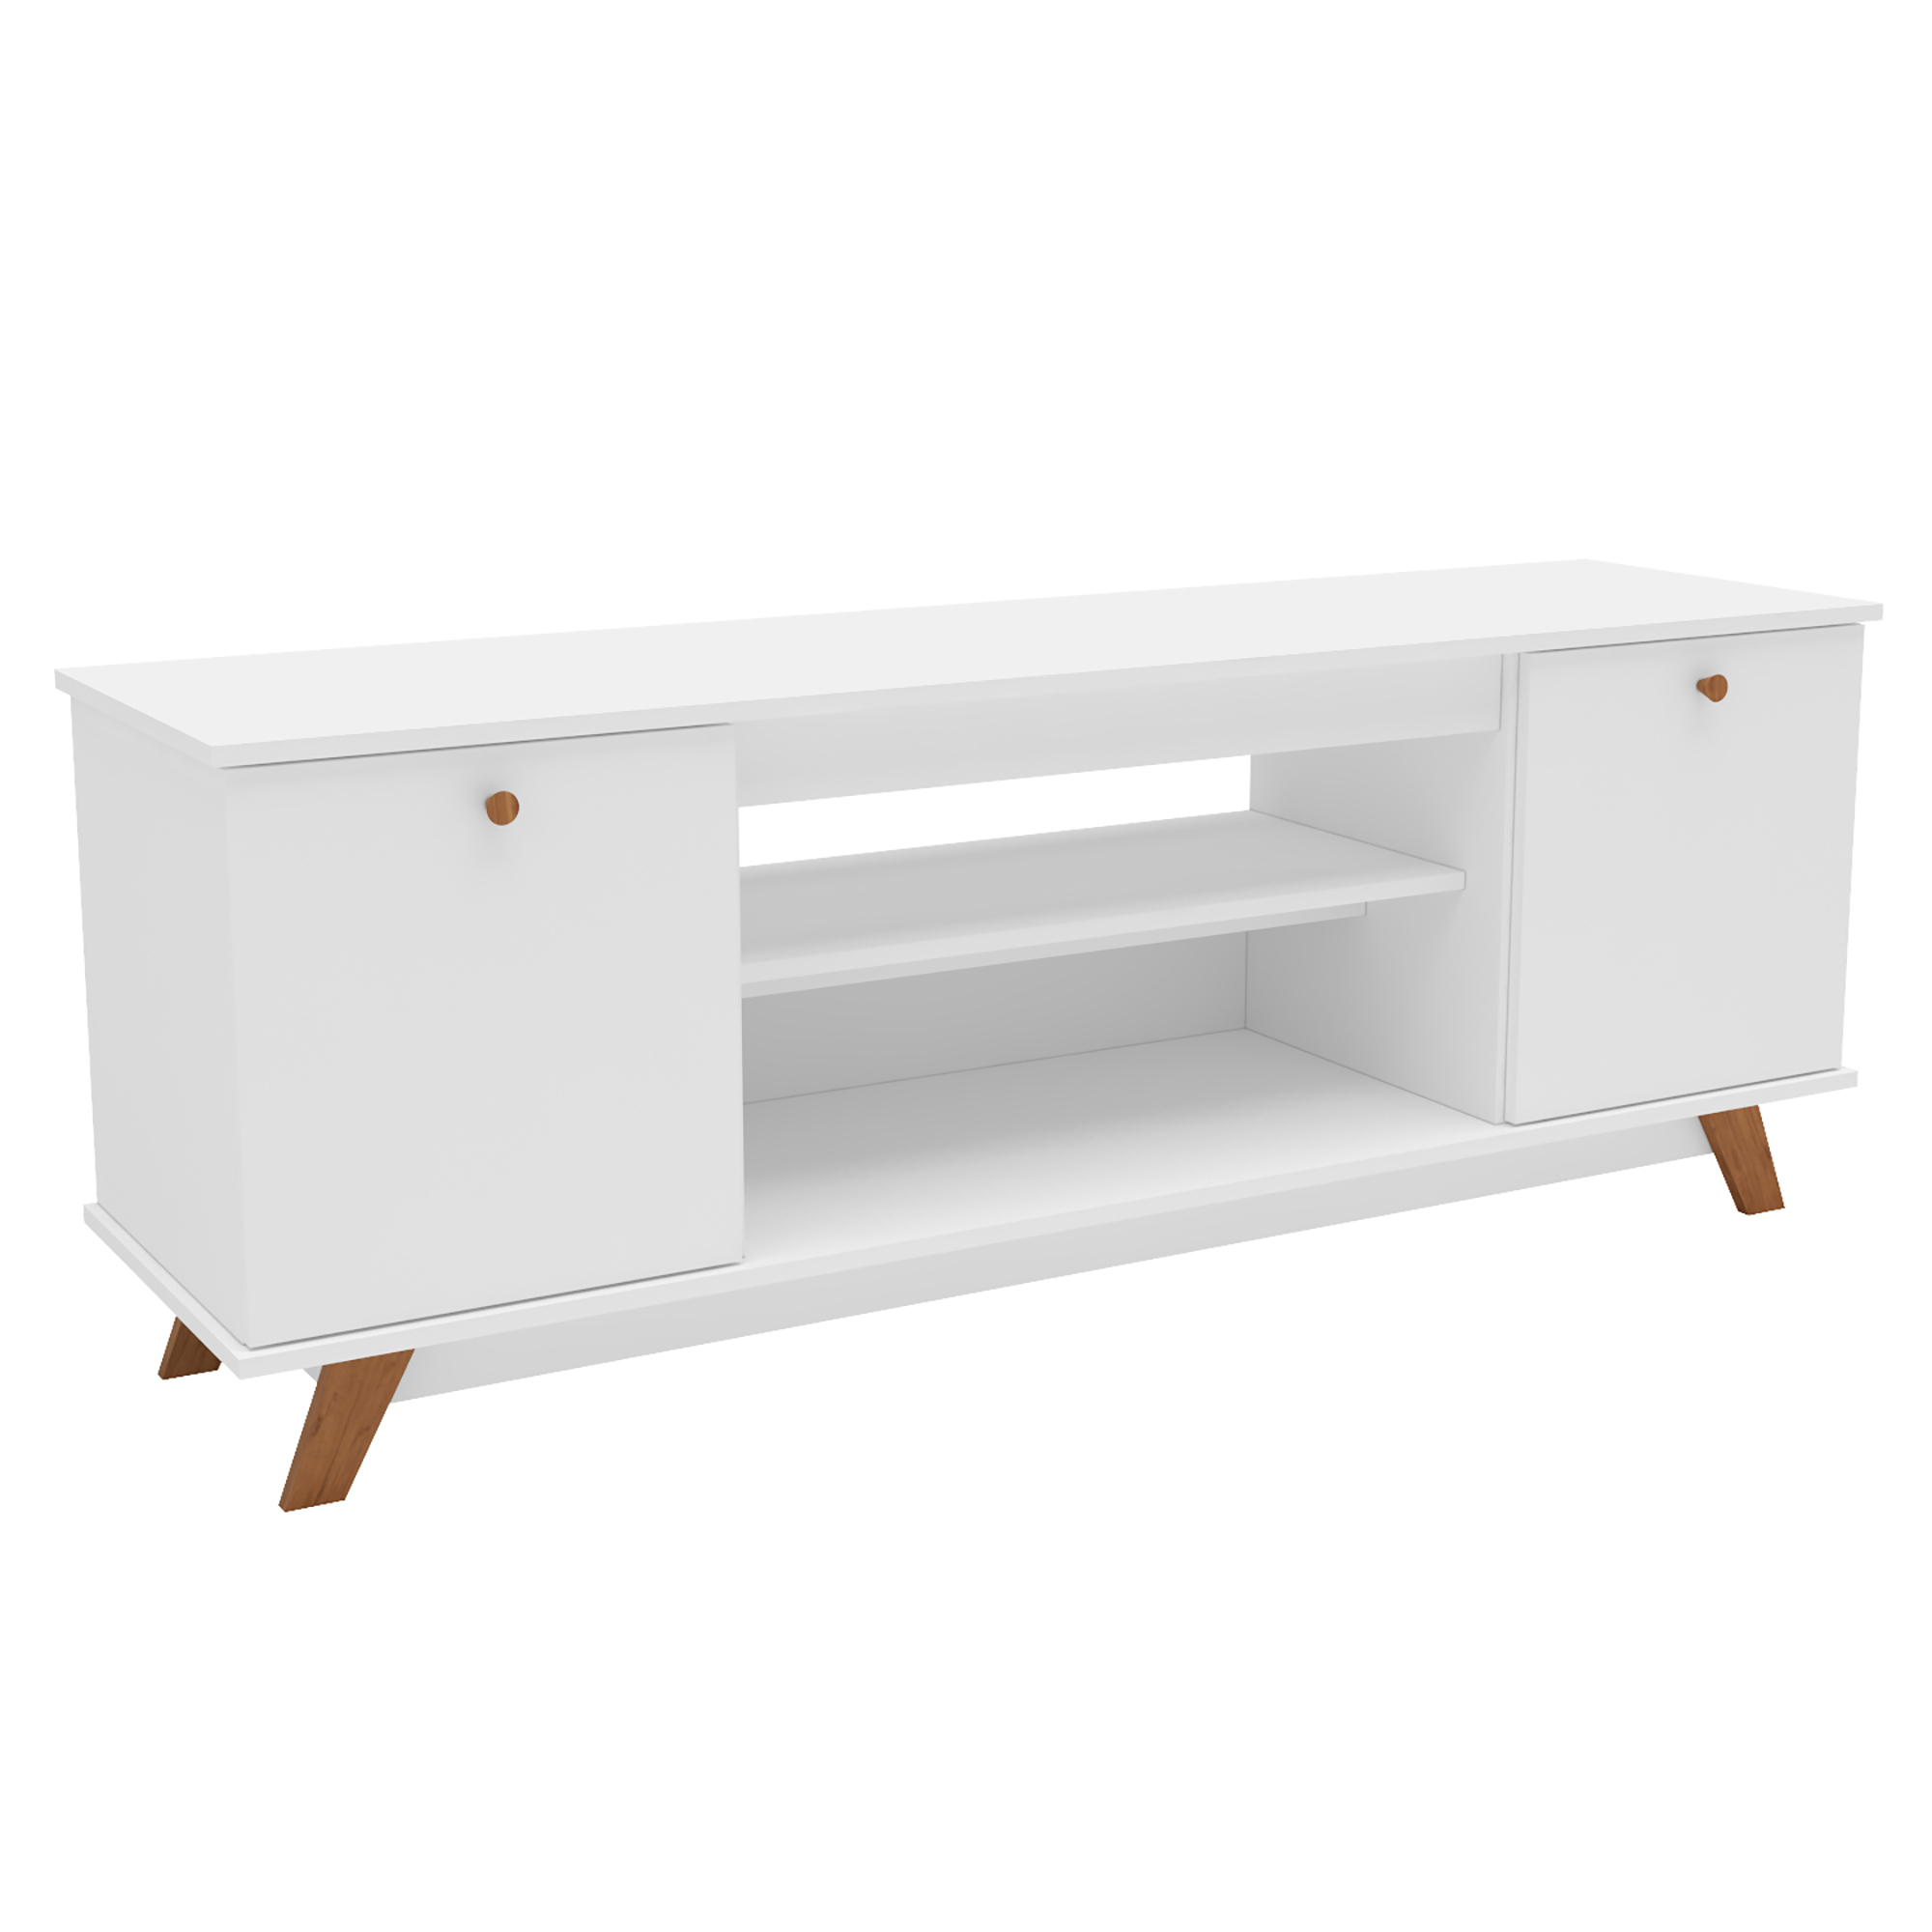 Cleveland 59 in. White Wood TV Stand with Two Storages Fits TV's up to 55 in.